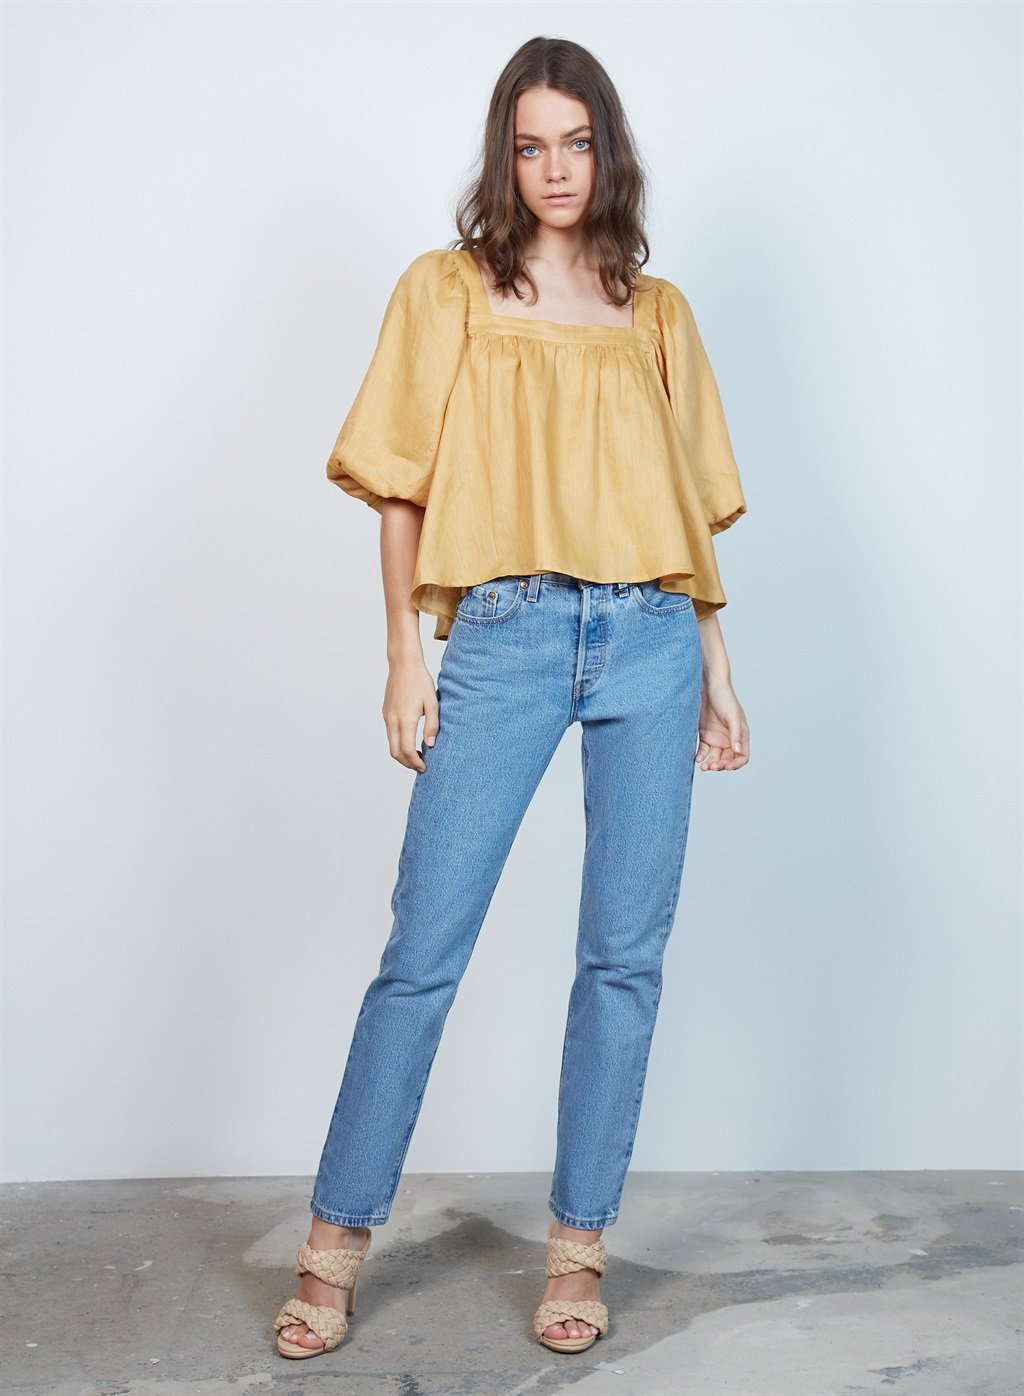 Wish - Afterglow Blouse - Golden